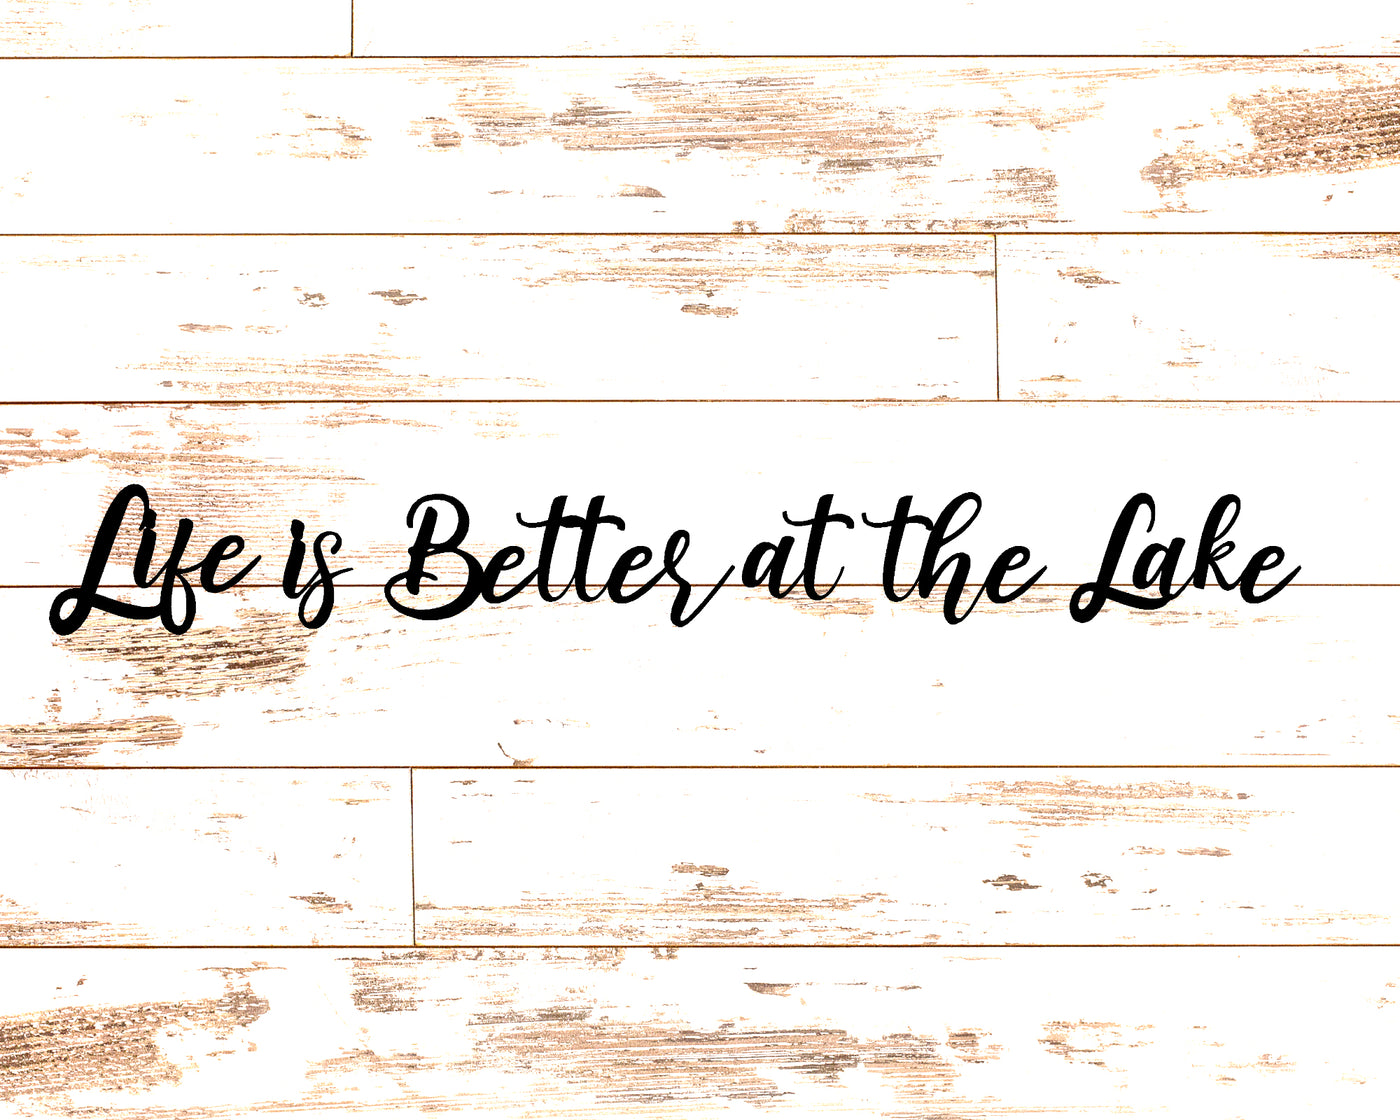 Life is Better at the Lake Cursive Metal Word Signs - Madison Iron and Wood - Metal Word Art - metal outdoor decor - Steel deocrations - american made products - veteran owned business products - fencing decorations - fencing supplies - custom wall decorations - personalized wall signs - steel - decorative post caps - steel post caps - metal post caps - brackets - structural brackets - home improvement - easter - easter decorations - easter gift - easter yard decor